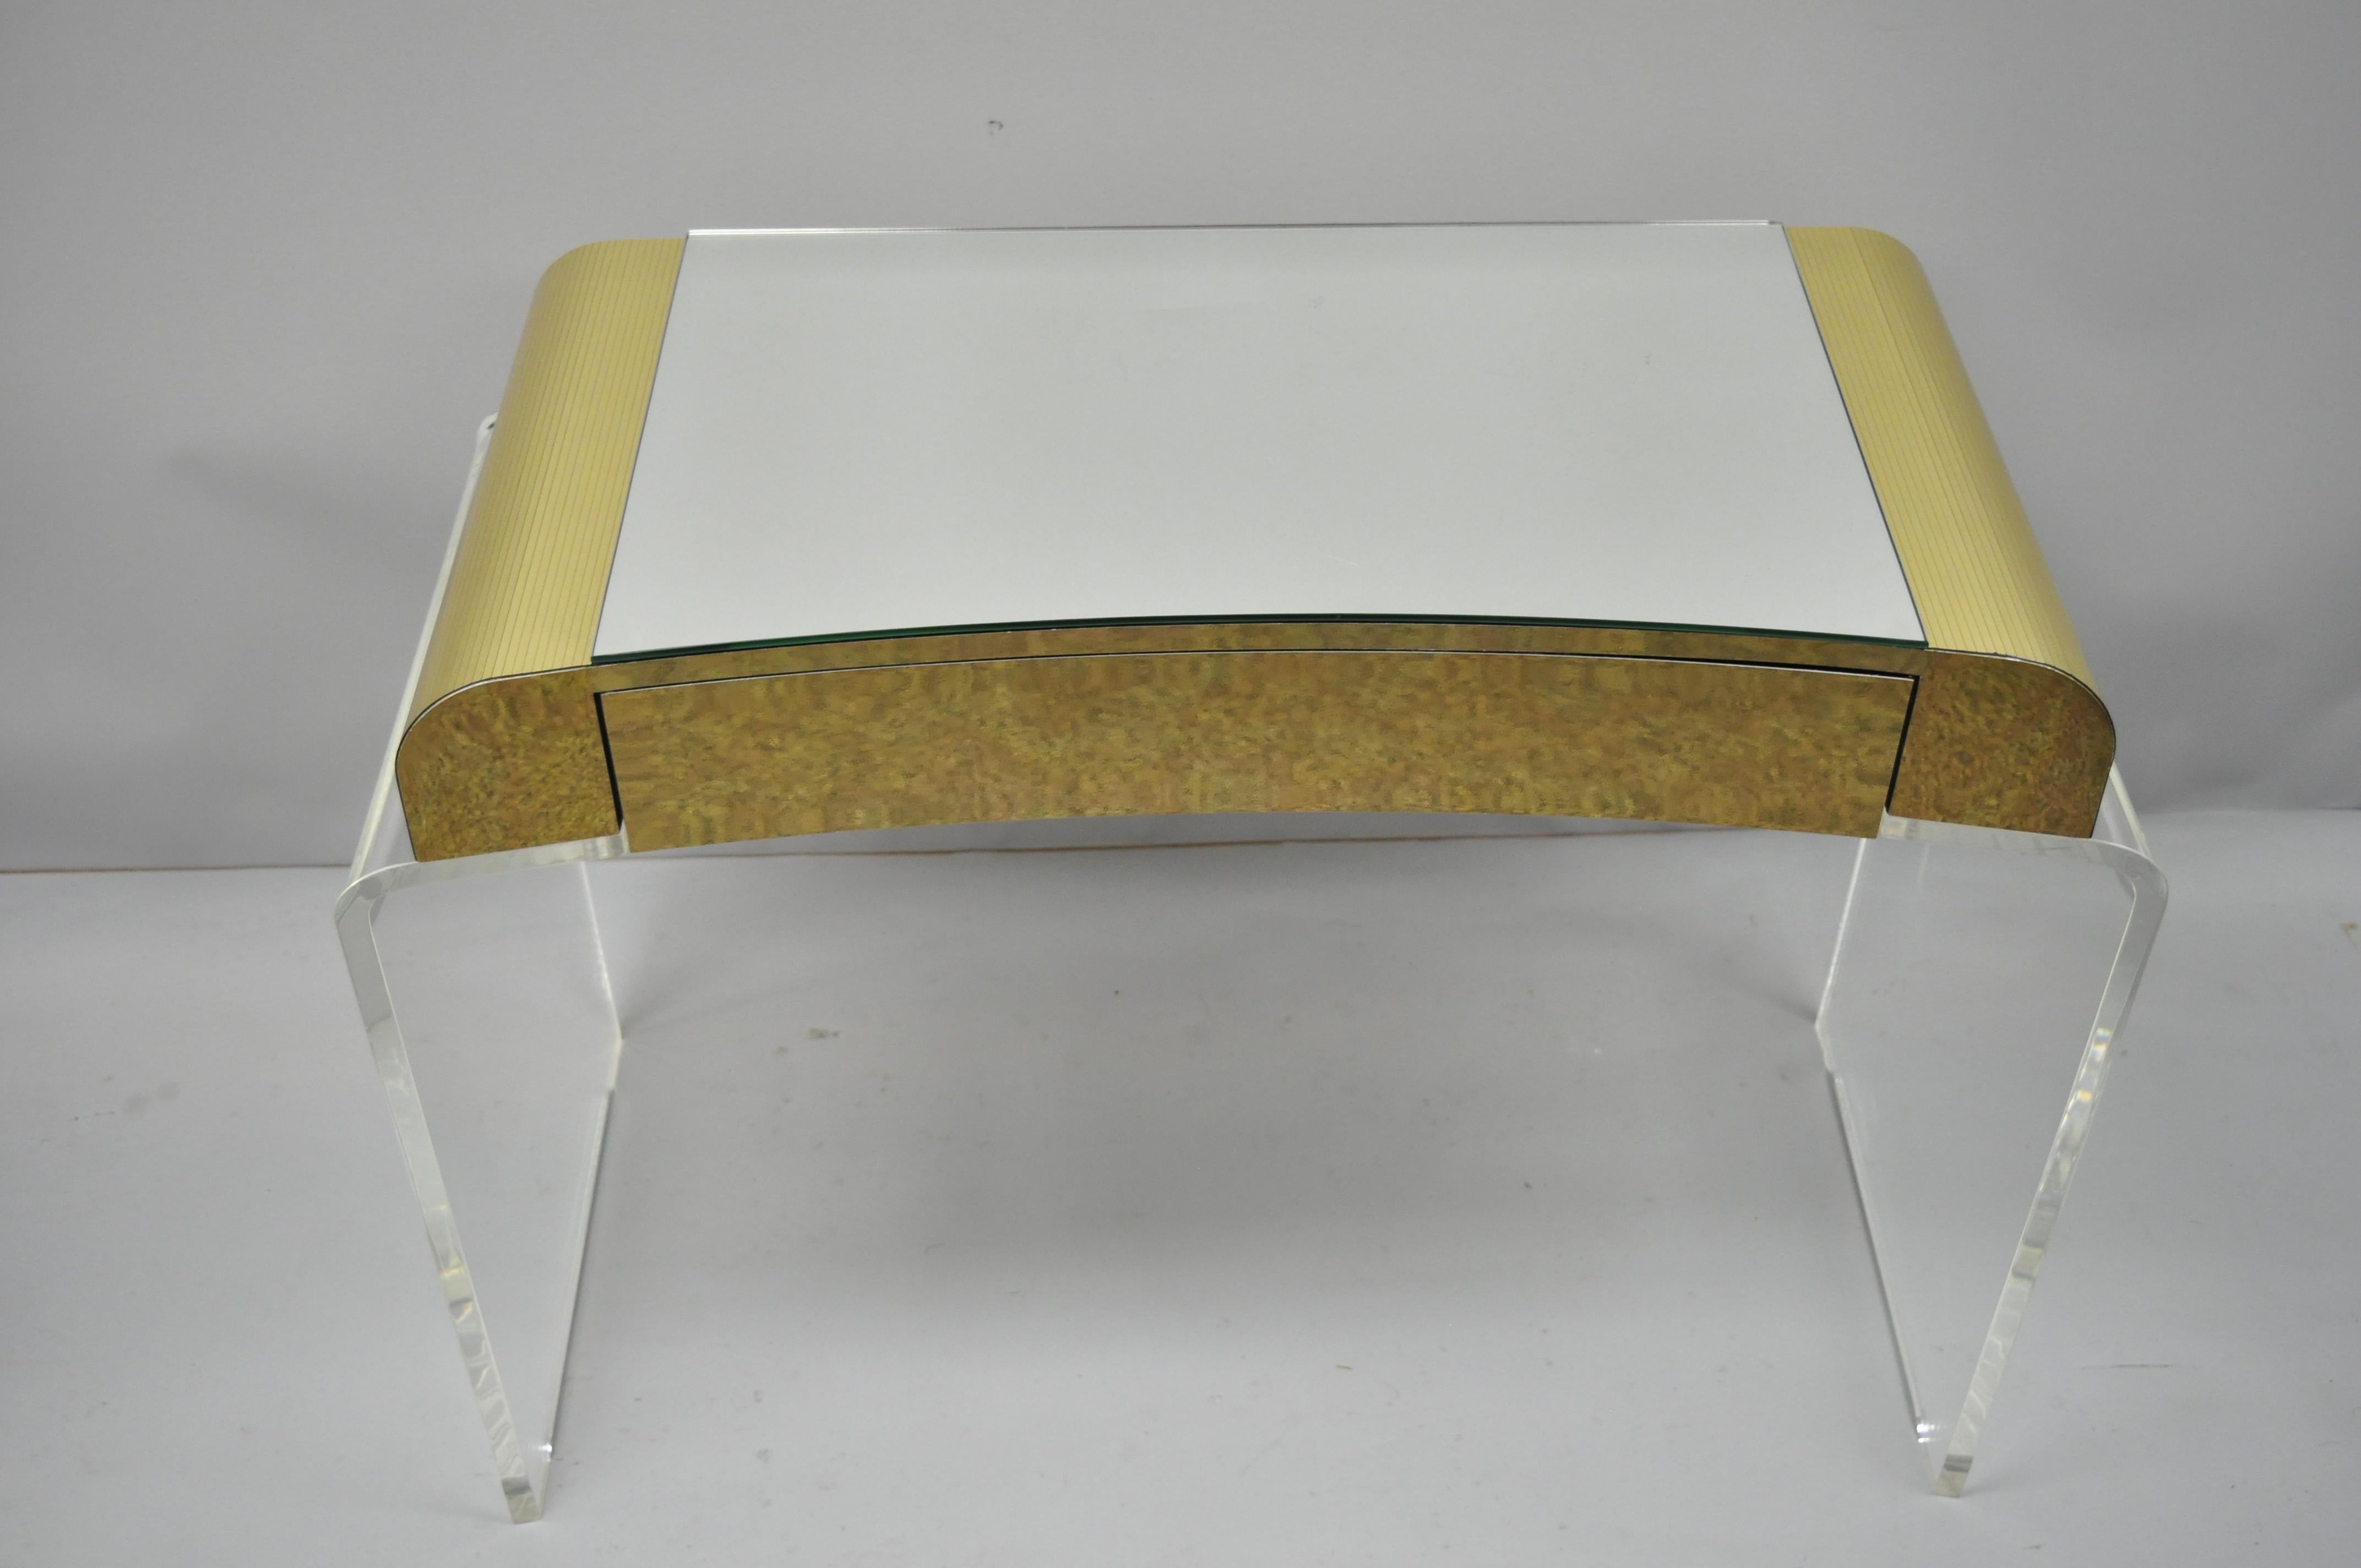 Lucite Waterfall Mirrored Vanity Table w/ Vanity Bench Brass Trim Chrome Wheels. Listing features thick clear Lucite 